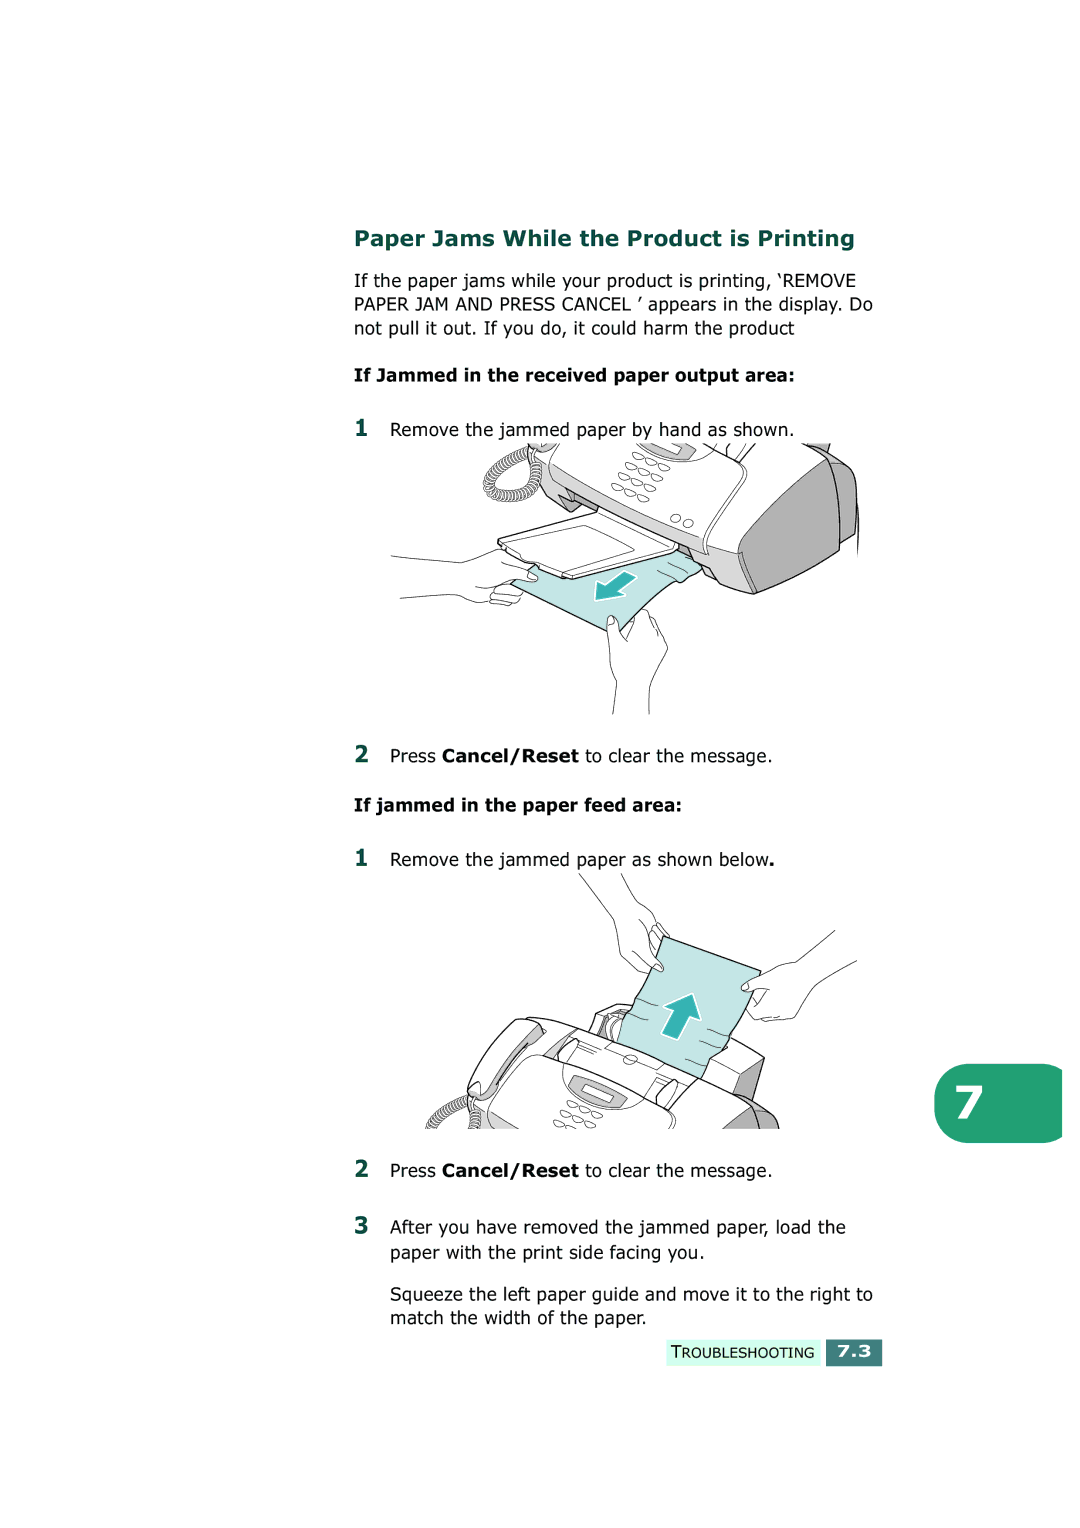 Samsung SF-430 manual Paper Jams While the Product is Printing, If Jammed in the received paper output area 